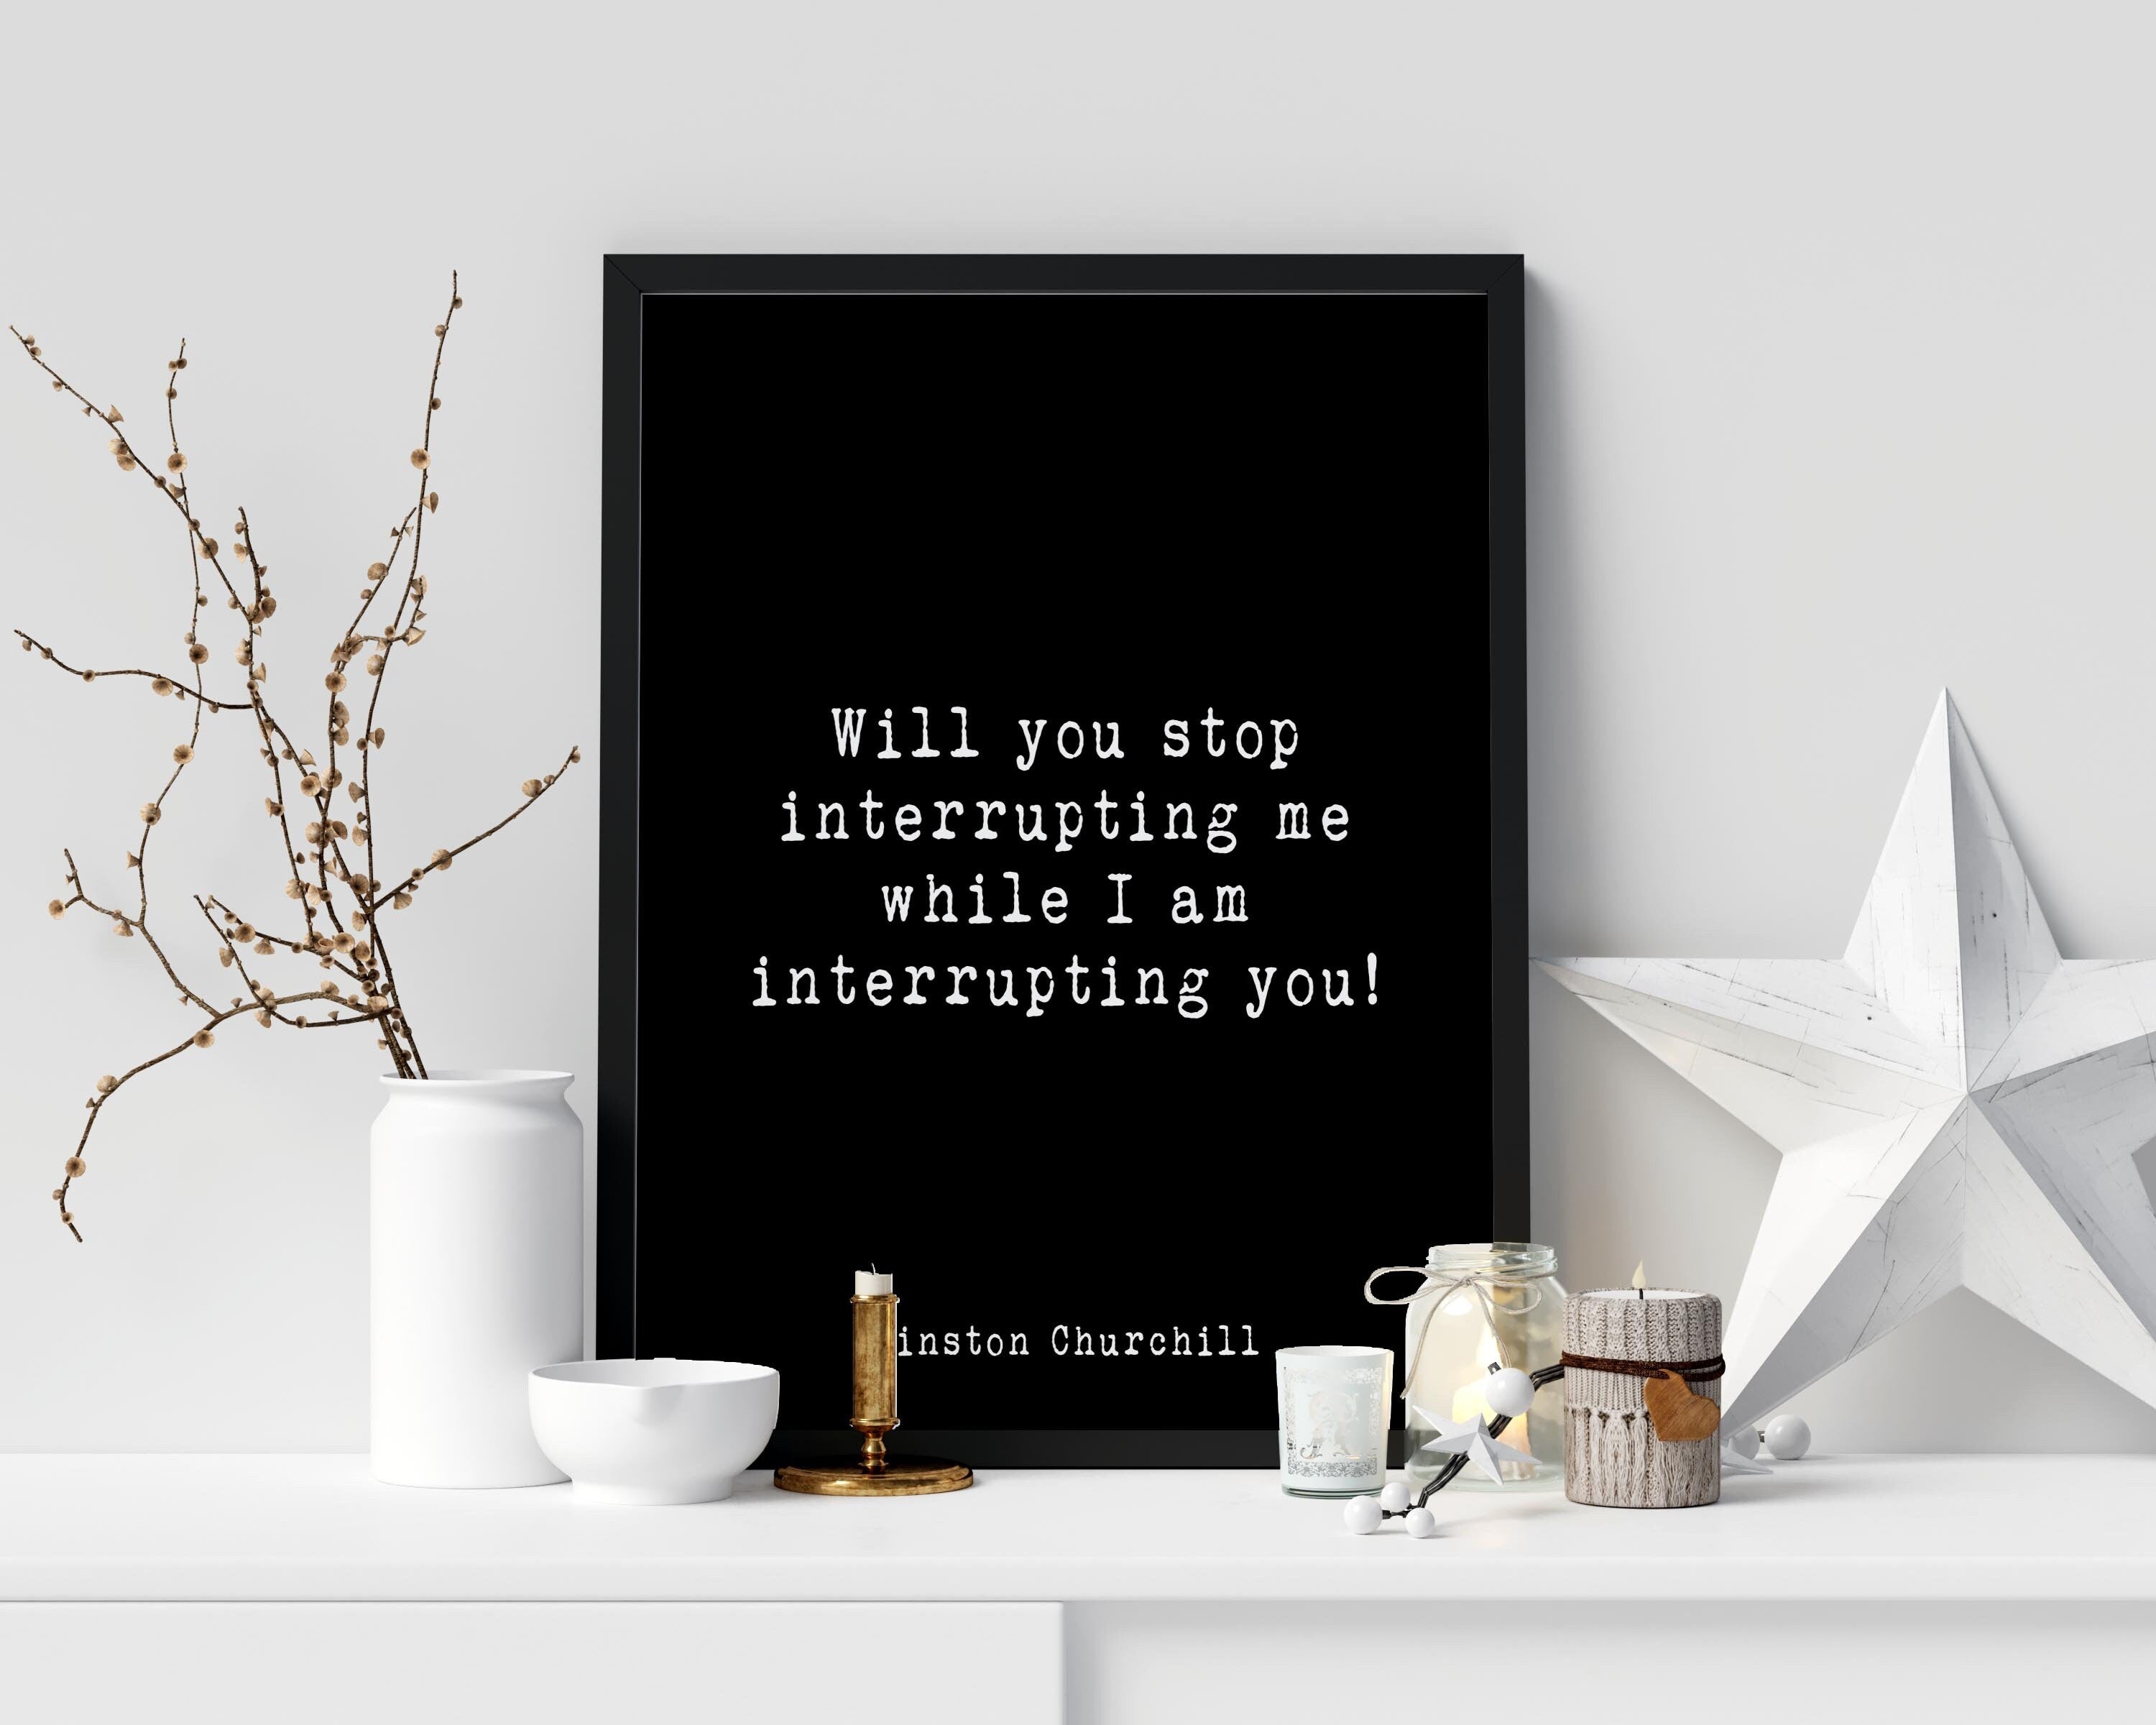 Winston Churchill Quote Print, Will You Stop Interrupting Me While I Am Interrupting You